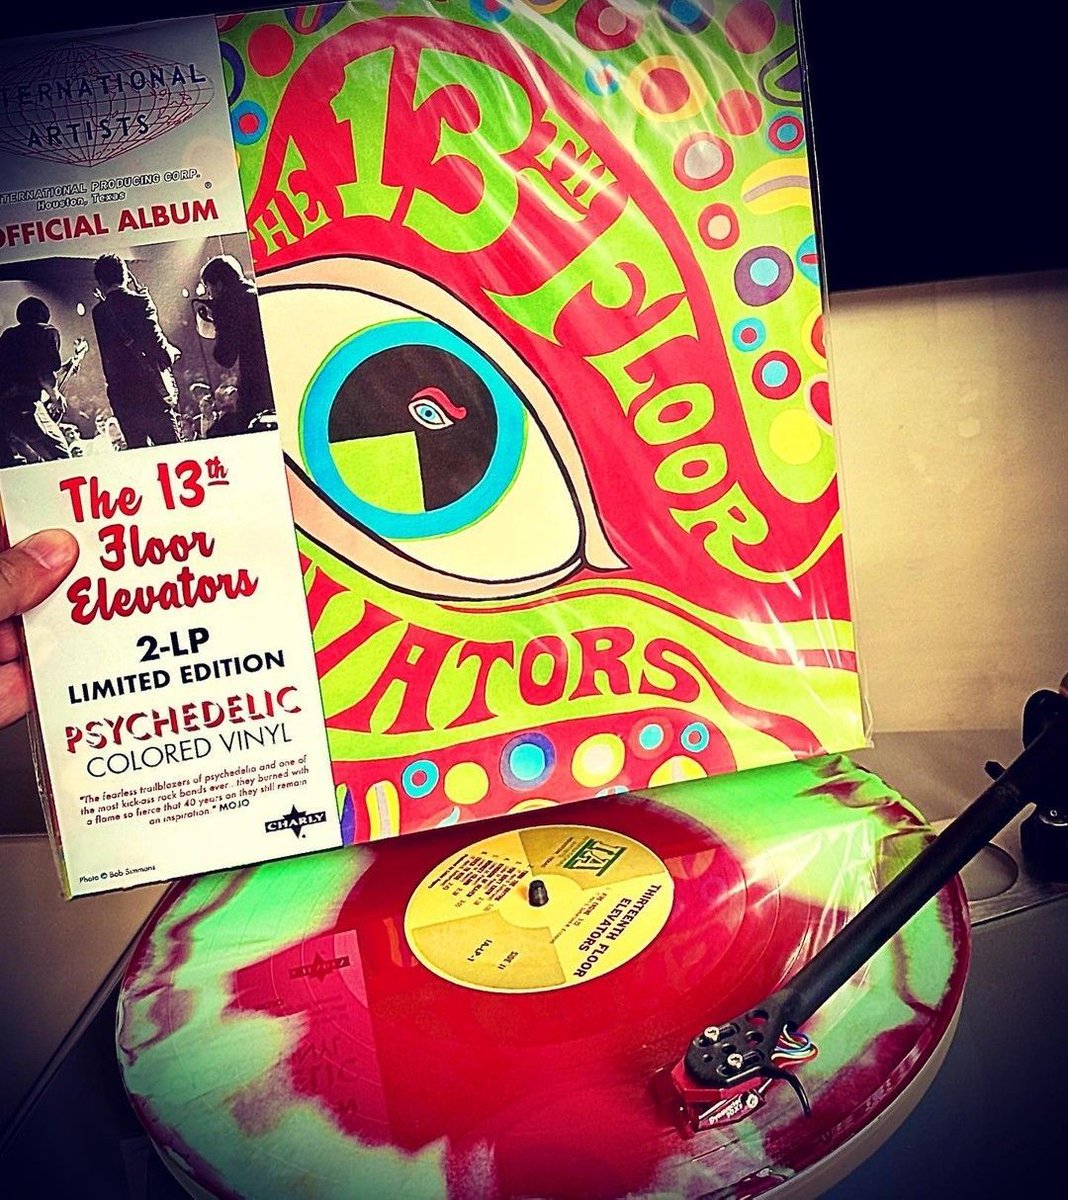 Ascending to psychedelic heights with the 13th Floor Elevators' 2 LP edition. A journey not just of sound, but of mind. 🌀🎶 

📸 ig: keepthemspinning 

#lovevinyl #vinylmusic #vinylcollectors #vinyllife #recordcollectionpost #recordlover #igvinyl #vinylrecords #instarecords